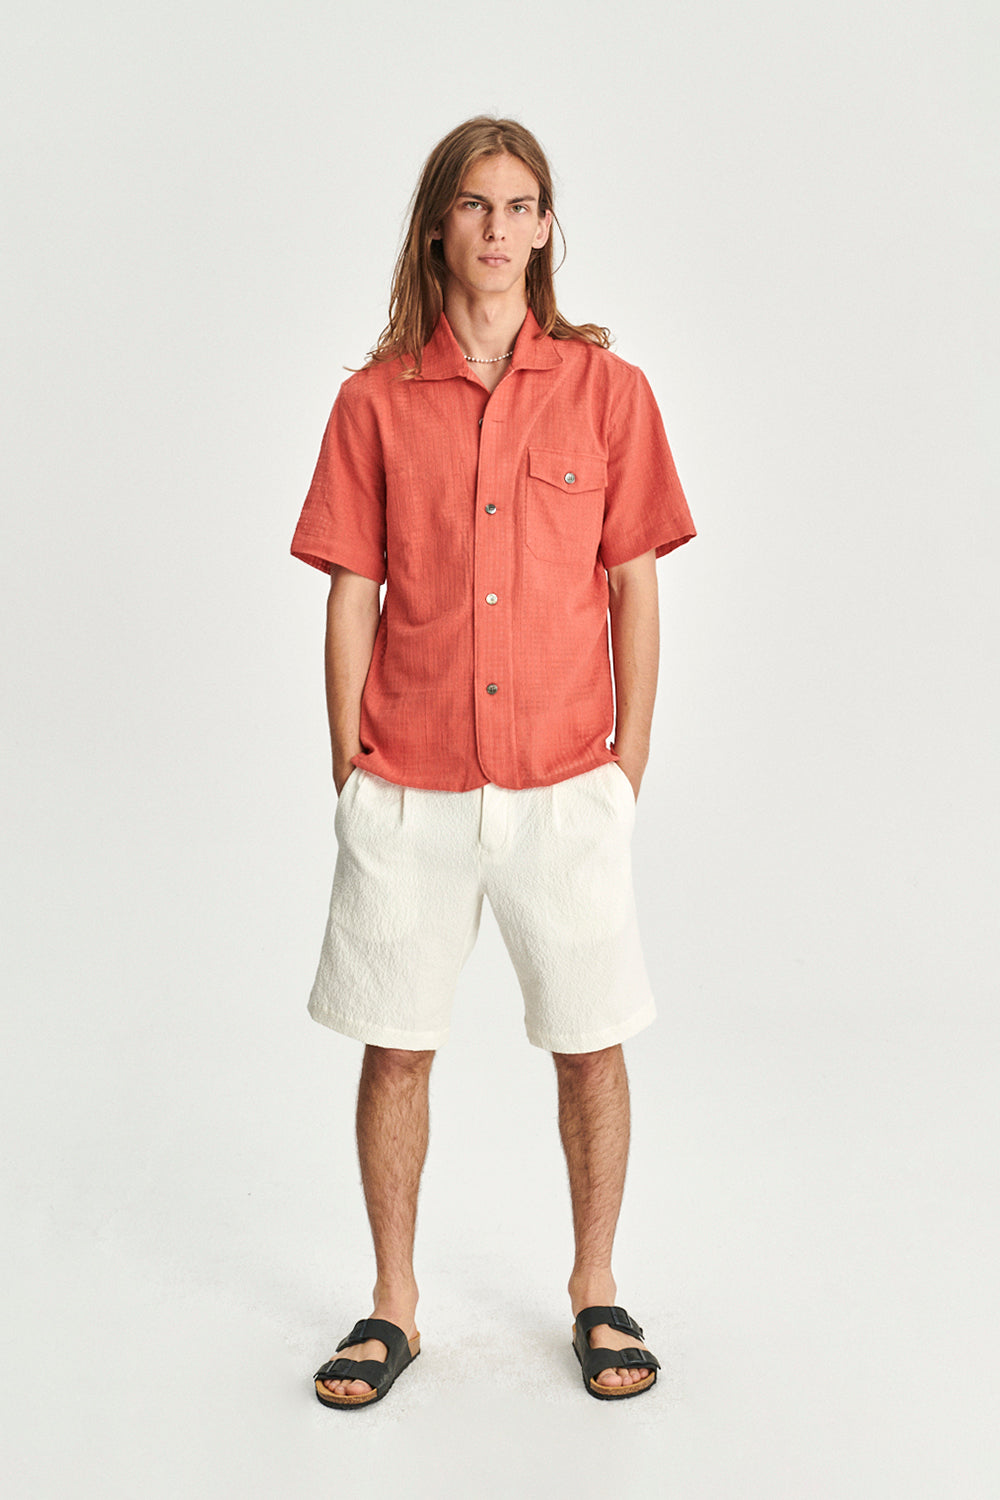 Short Sleeve Tiger Spread Collar Shirt in a Soft Coral Red Airy Portuguese Cotton